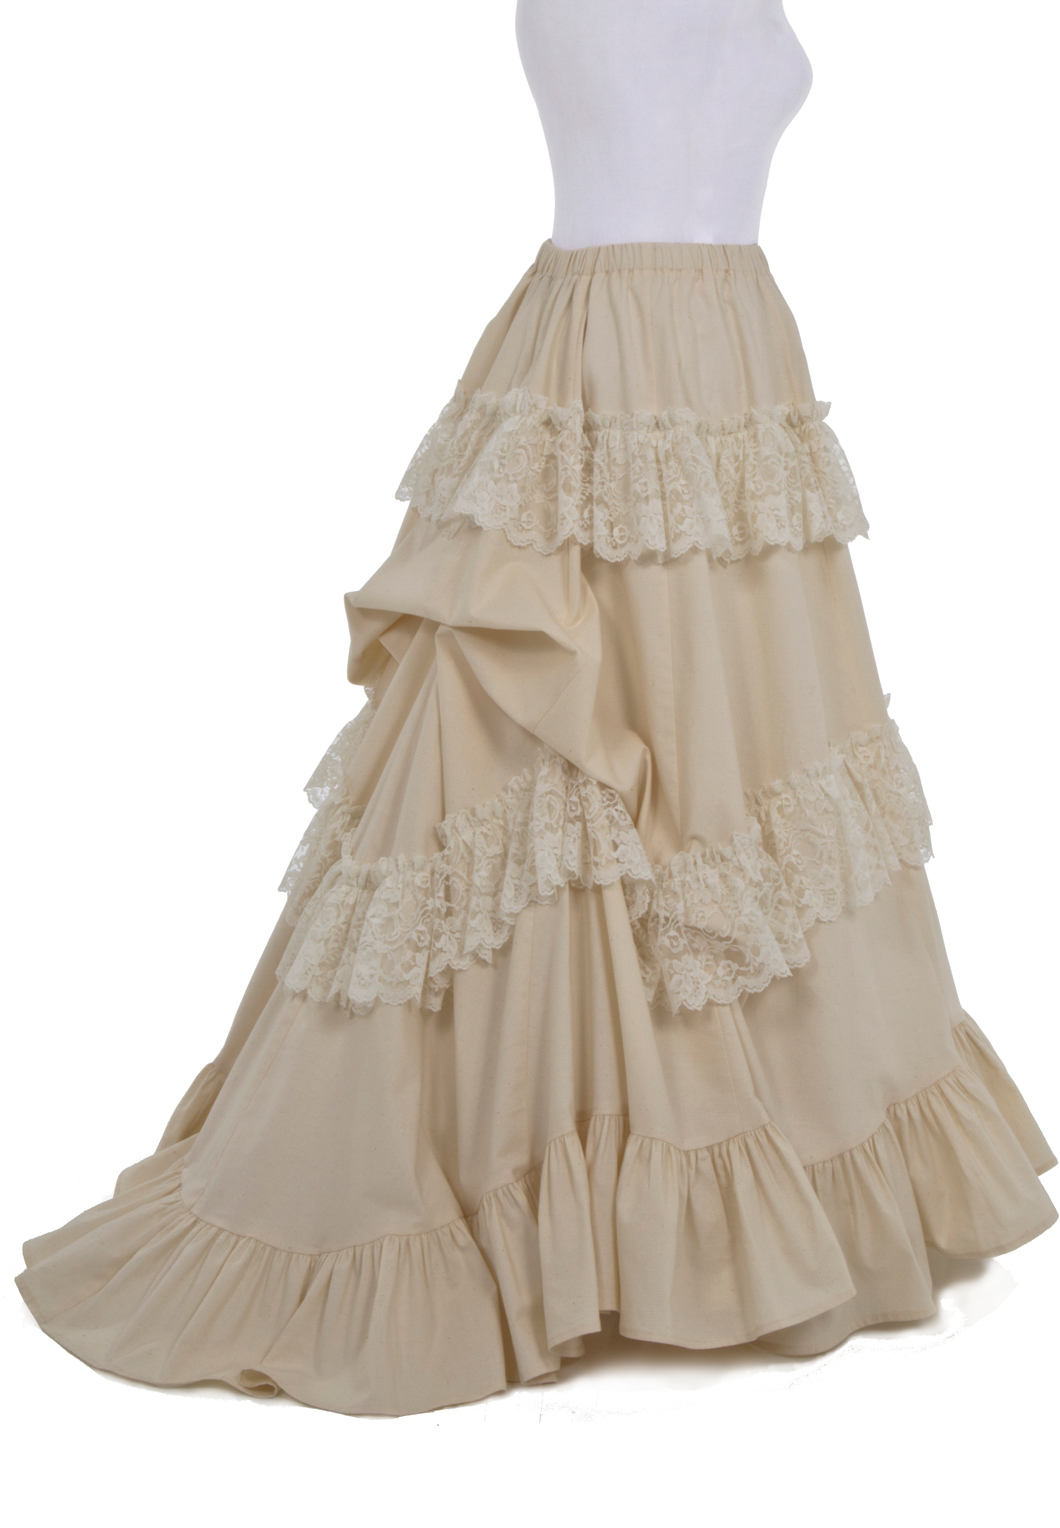 Annamae Victorian Skirt | Recollections